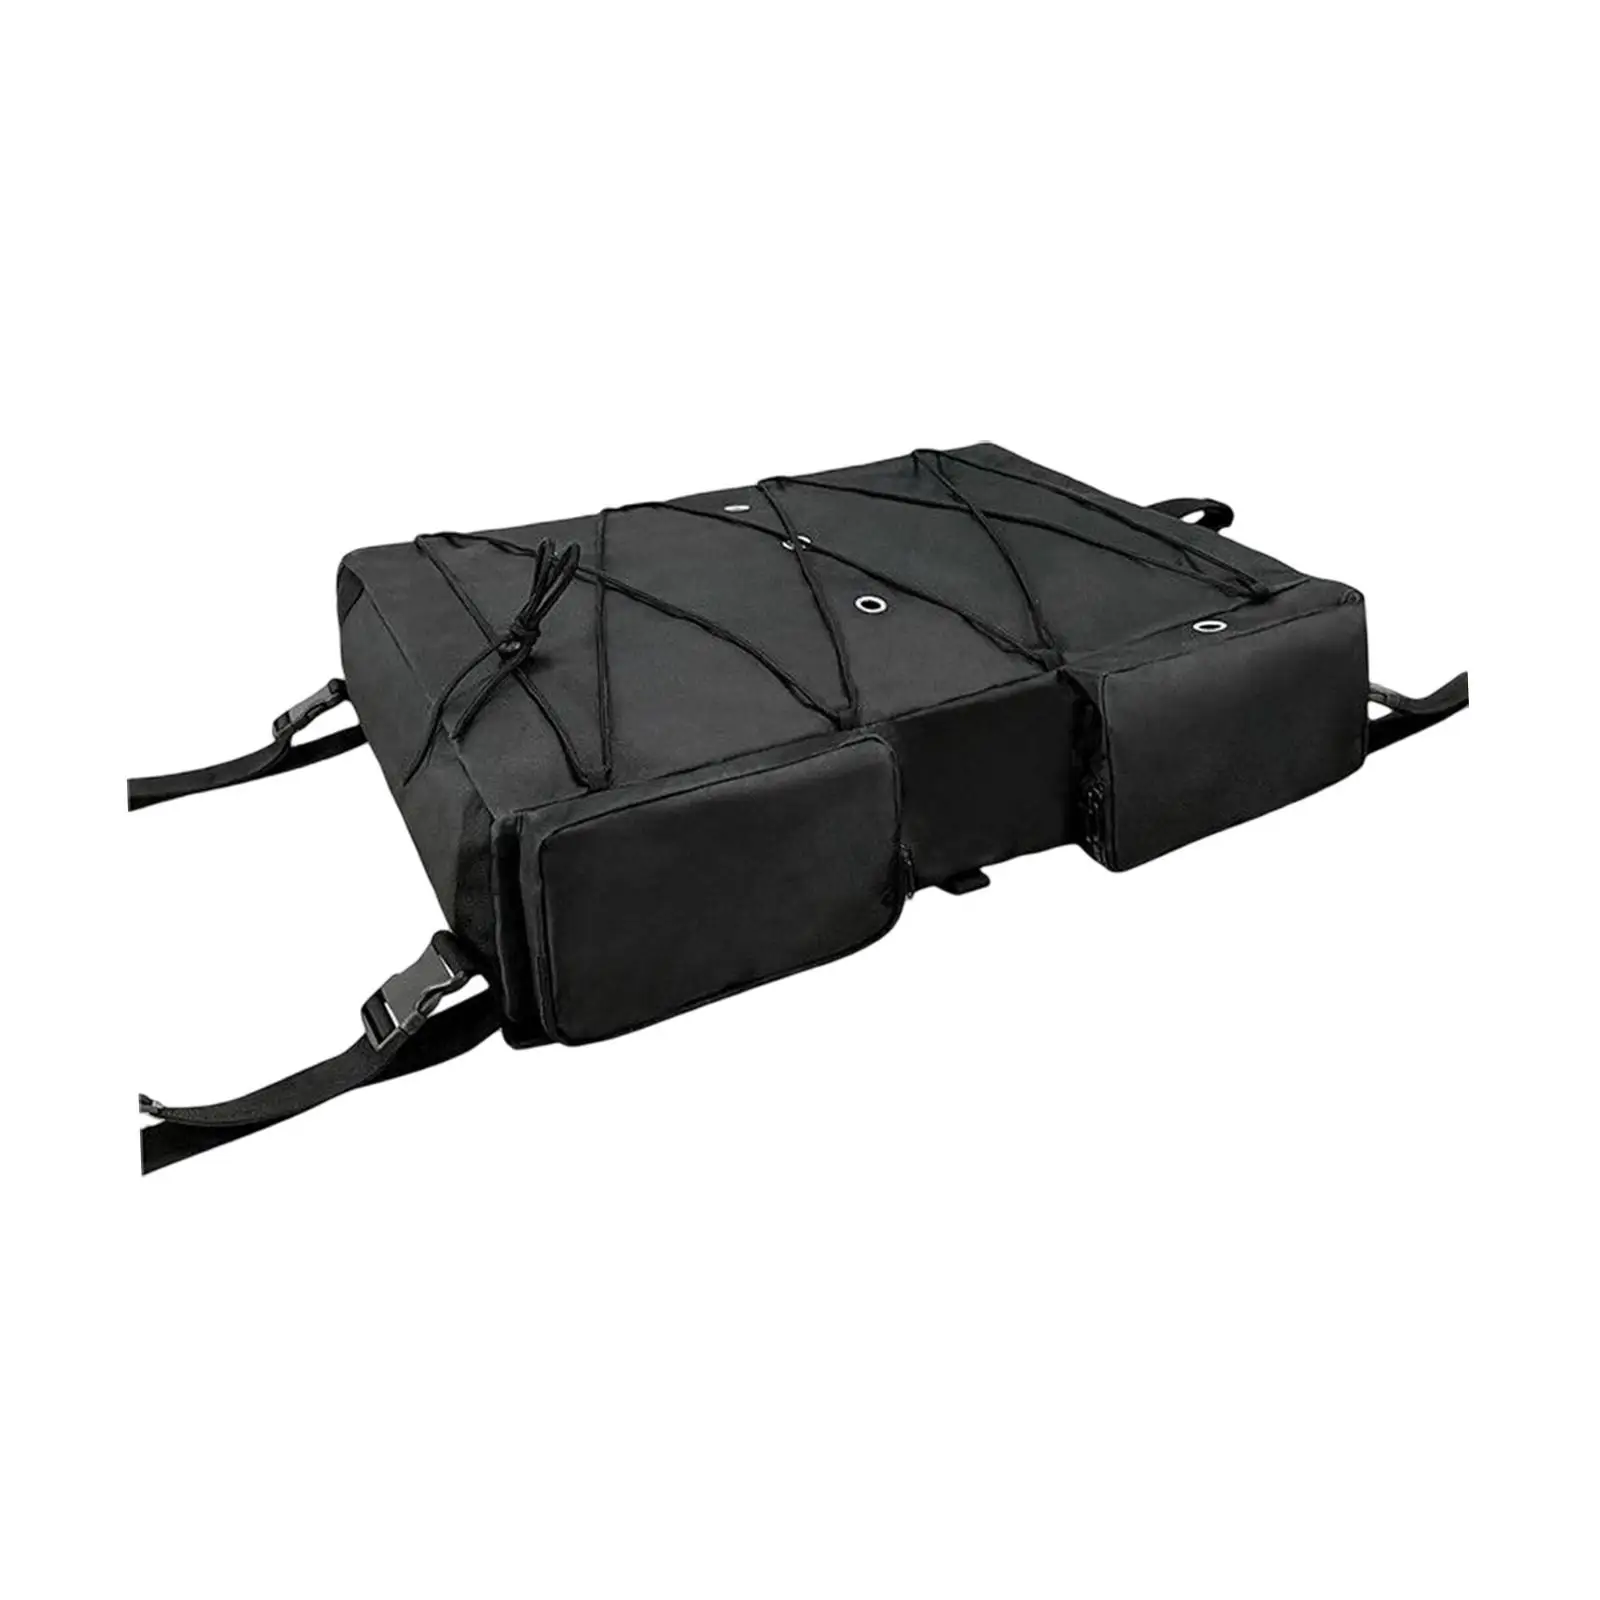 T Top Bag 600D Oxford Fabric Waterproof with Mesh Pockets Bimini Top Storage Bags Jacket Storage Bag for T Top Boats